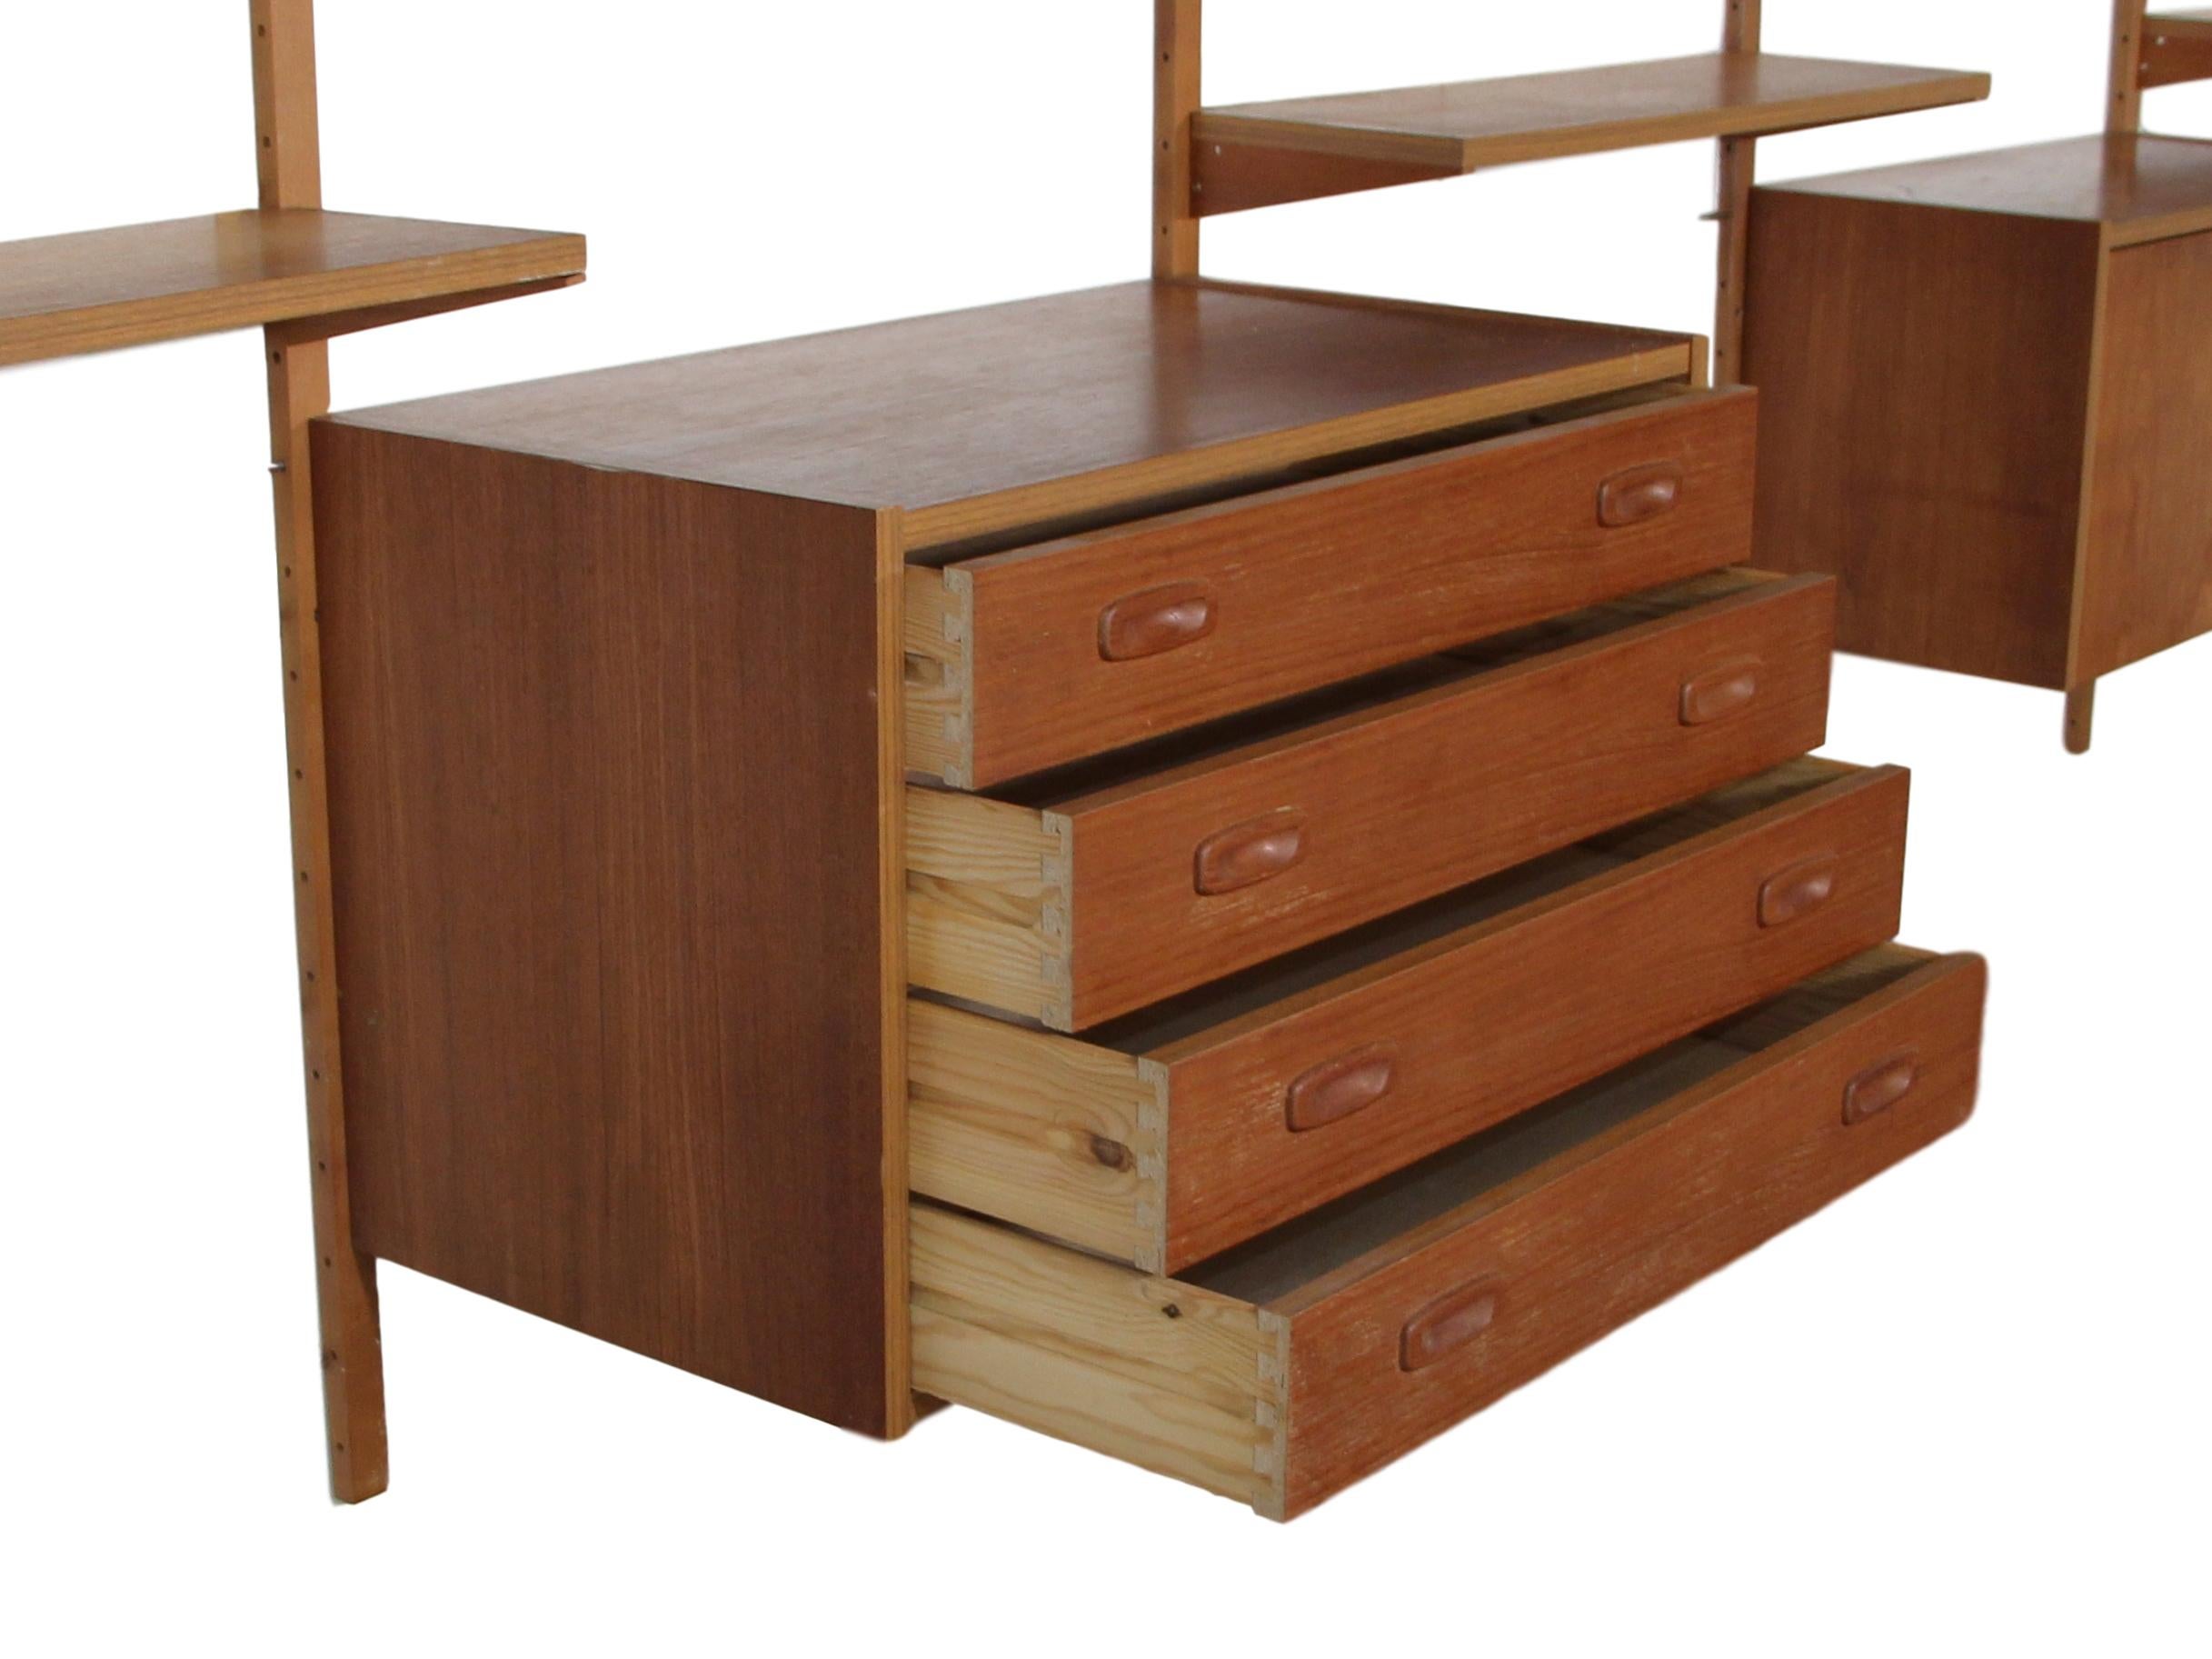 Midcentury Danish 7 Bay Teak Shelving Unit By PS Systems In Good Condition In Norcross, GA